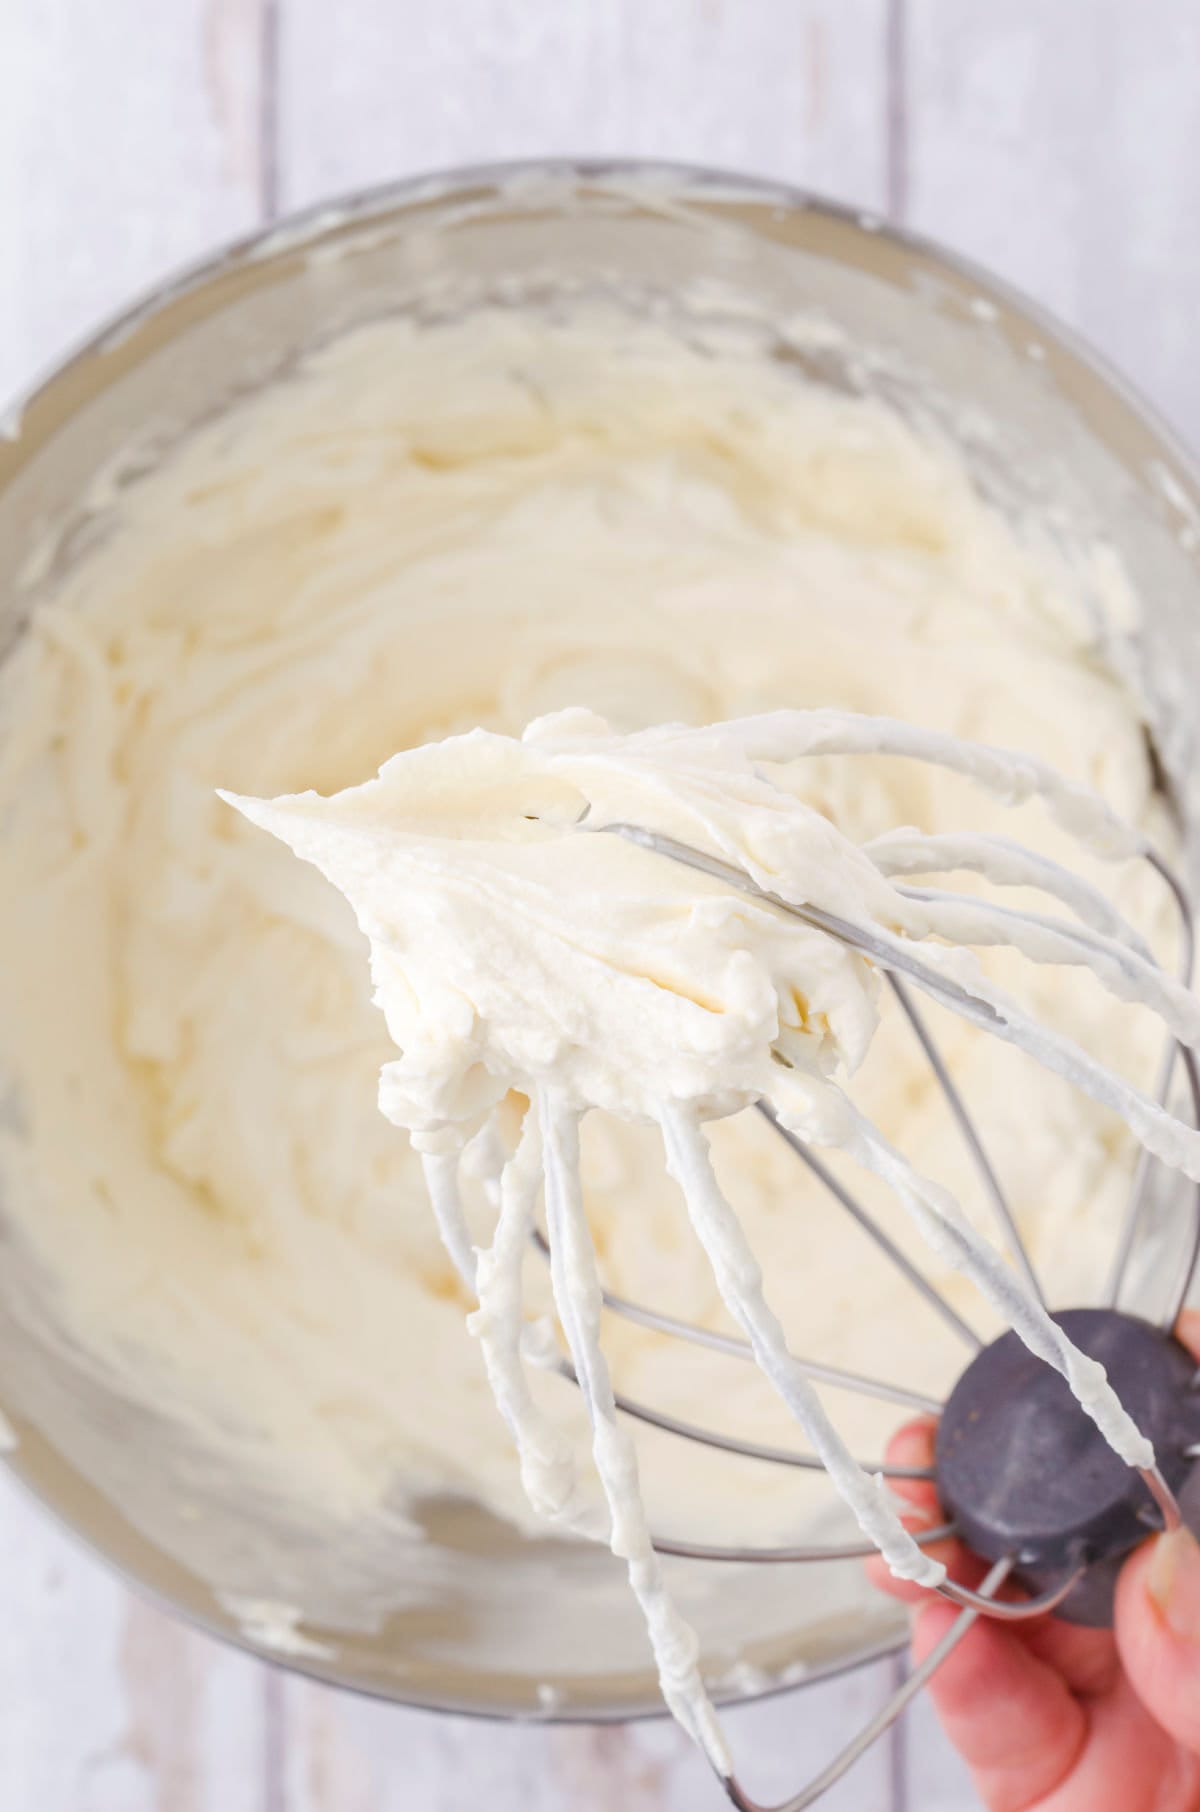 Whipped Cream Frosting with Cream Cheese - Stable & Perfectly Sweet